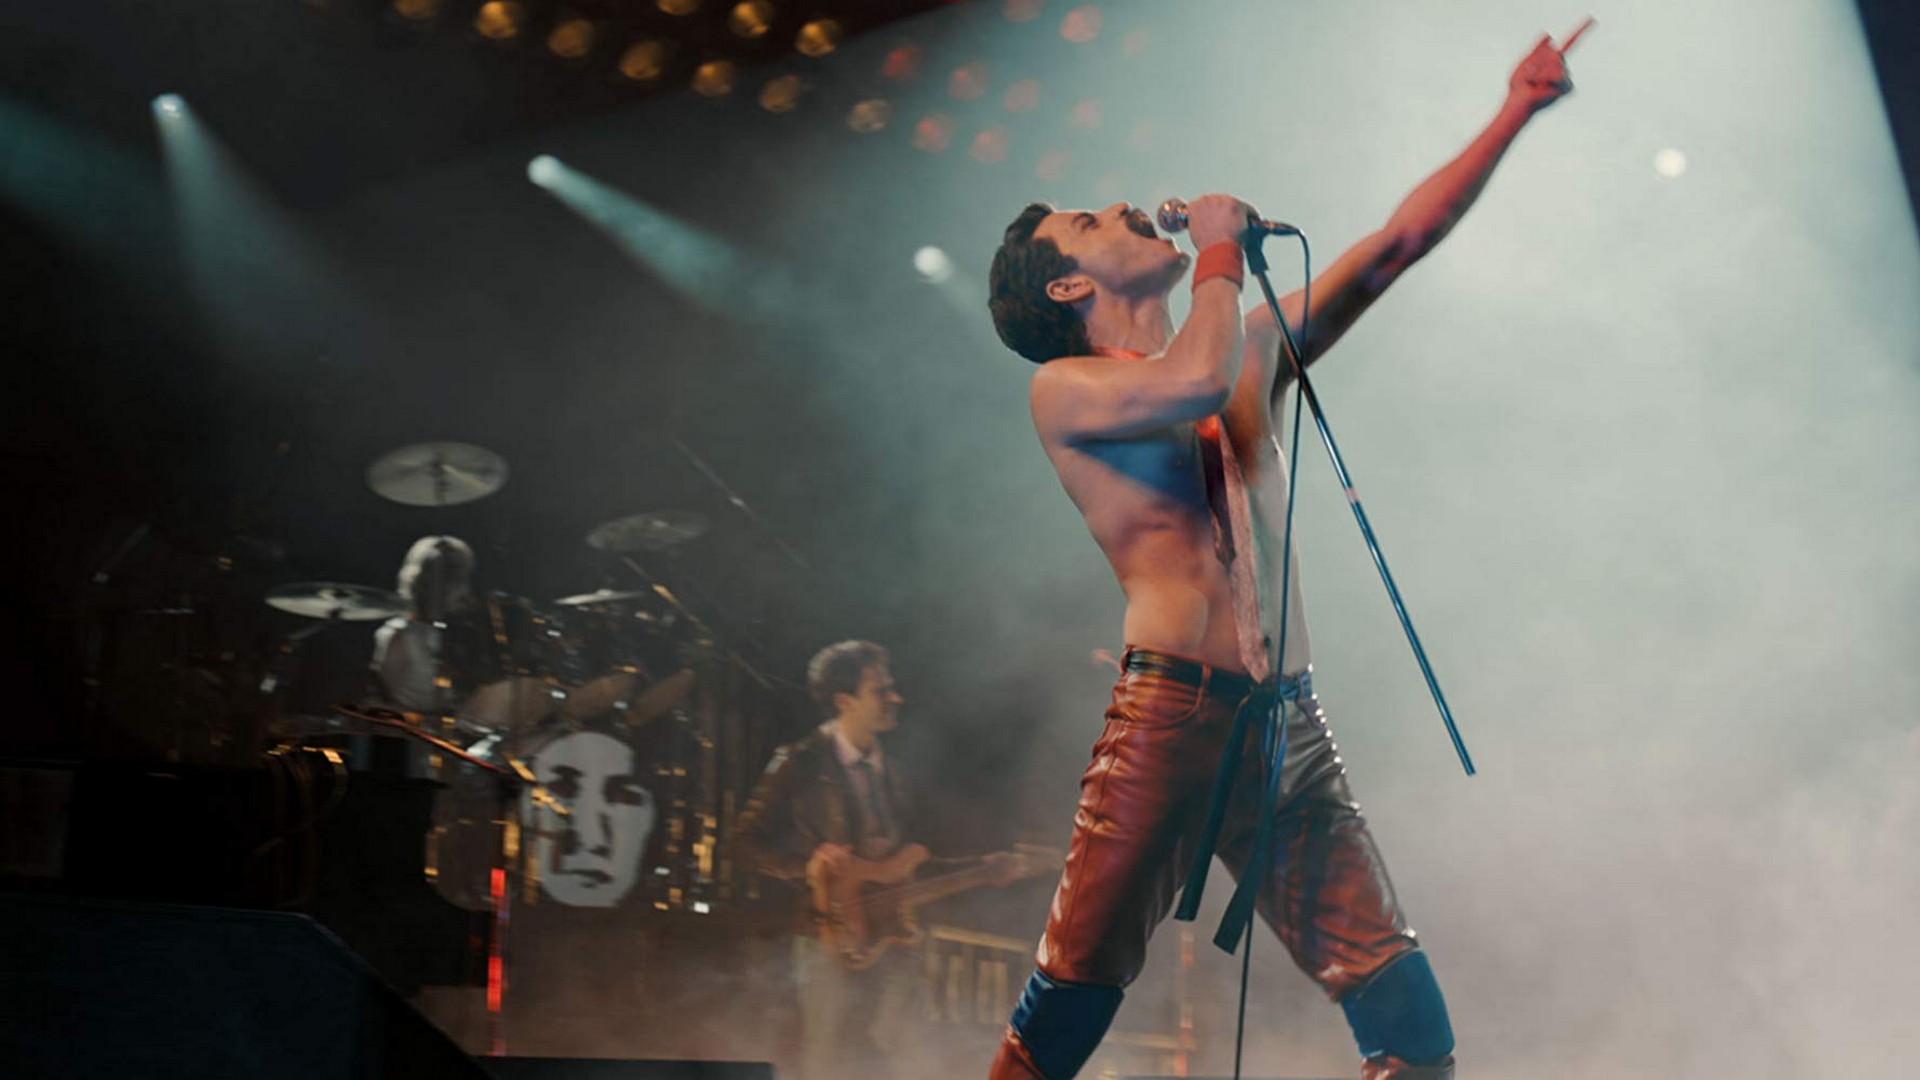 Bohemian Rhapsody Wallpaper HD With Resolution 1920X1080 pixel. You can make this wallpaper for your Mac or Windows Desktop Background, iPhone, Android or Tablet and another Smartphone device for free